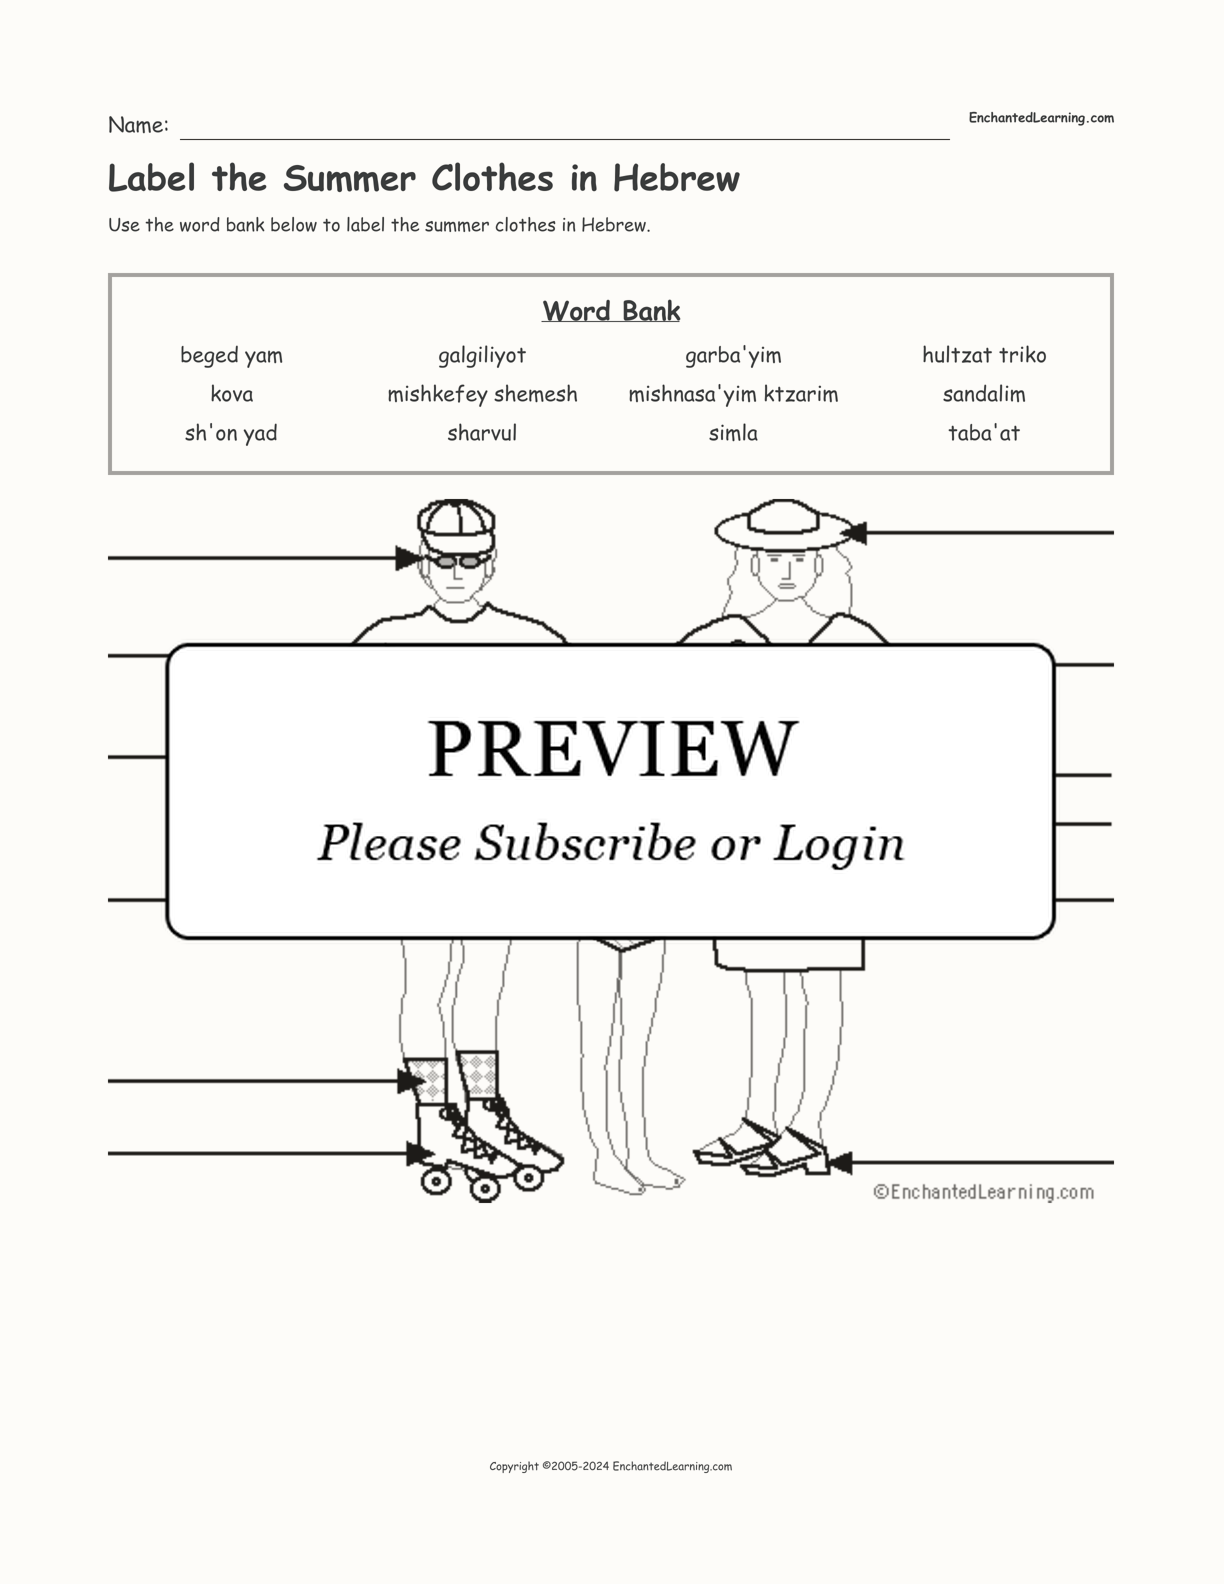 Label the Summer Clothes in Hebrew interactive worksheet page 1